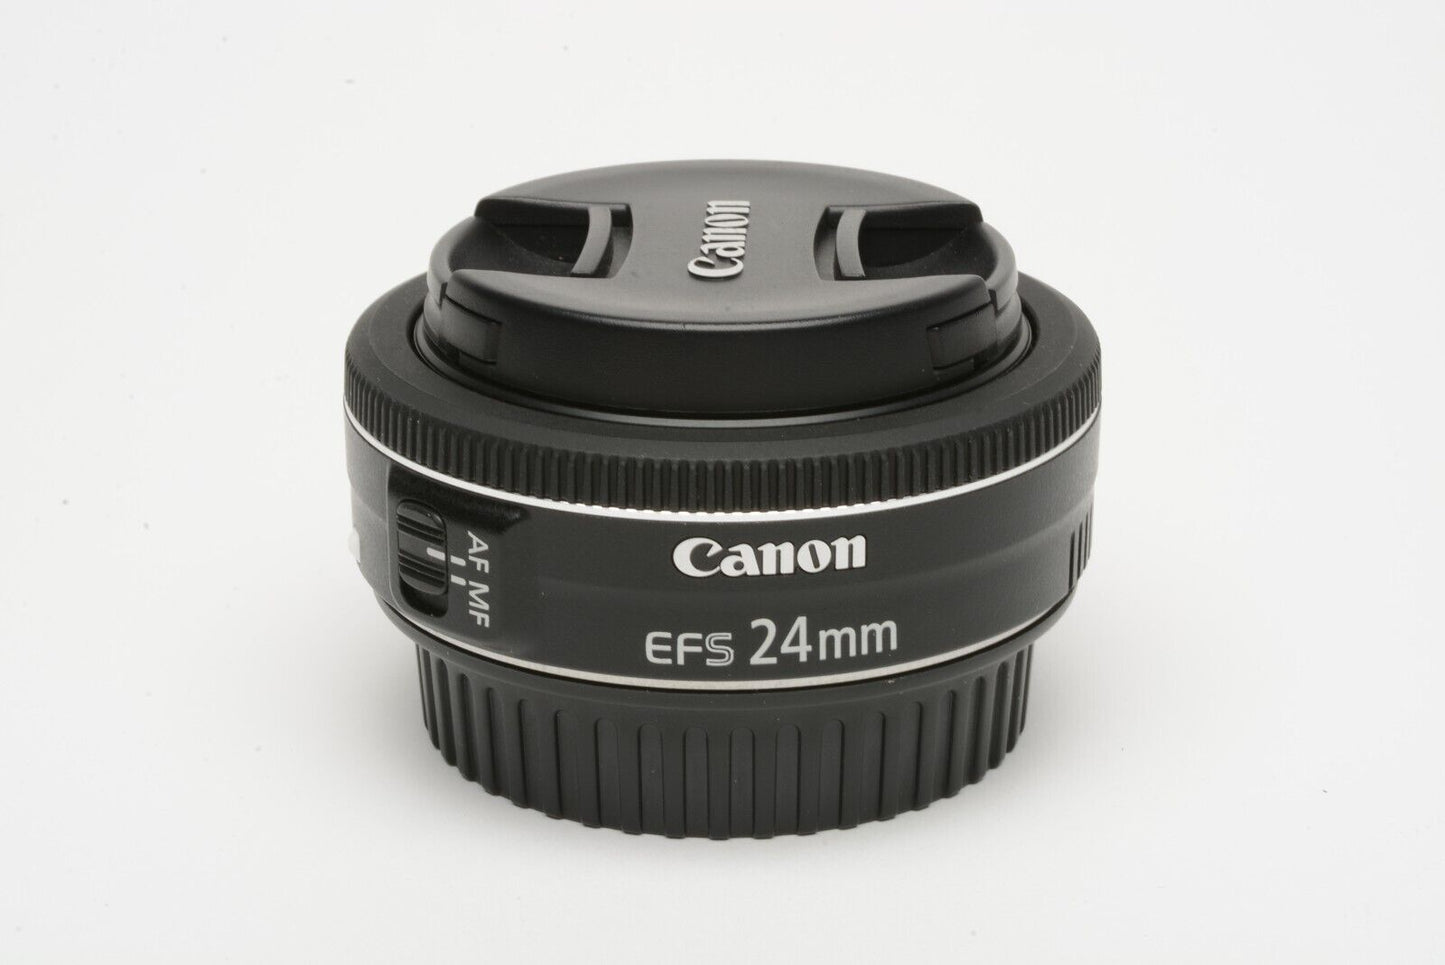 MINT- CANON EFS 24mm f2.8 STM LENS, BARELY USED, CAPS